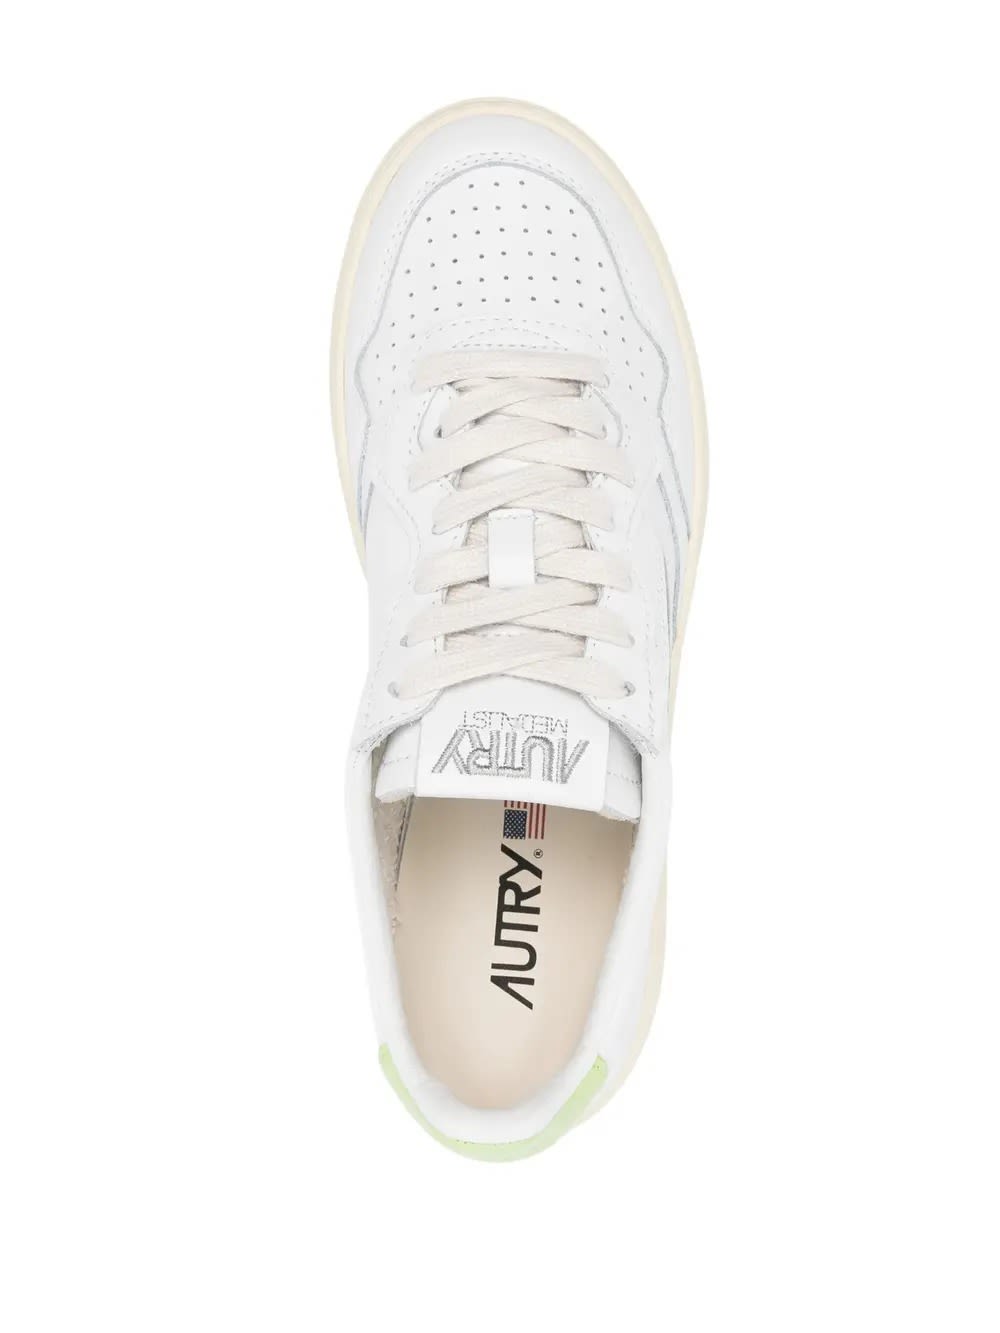 Shop Autry Medalist Low Sneakers In White And Green Leather